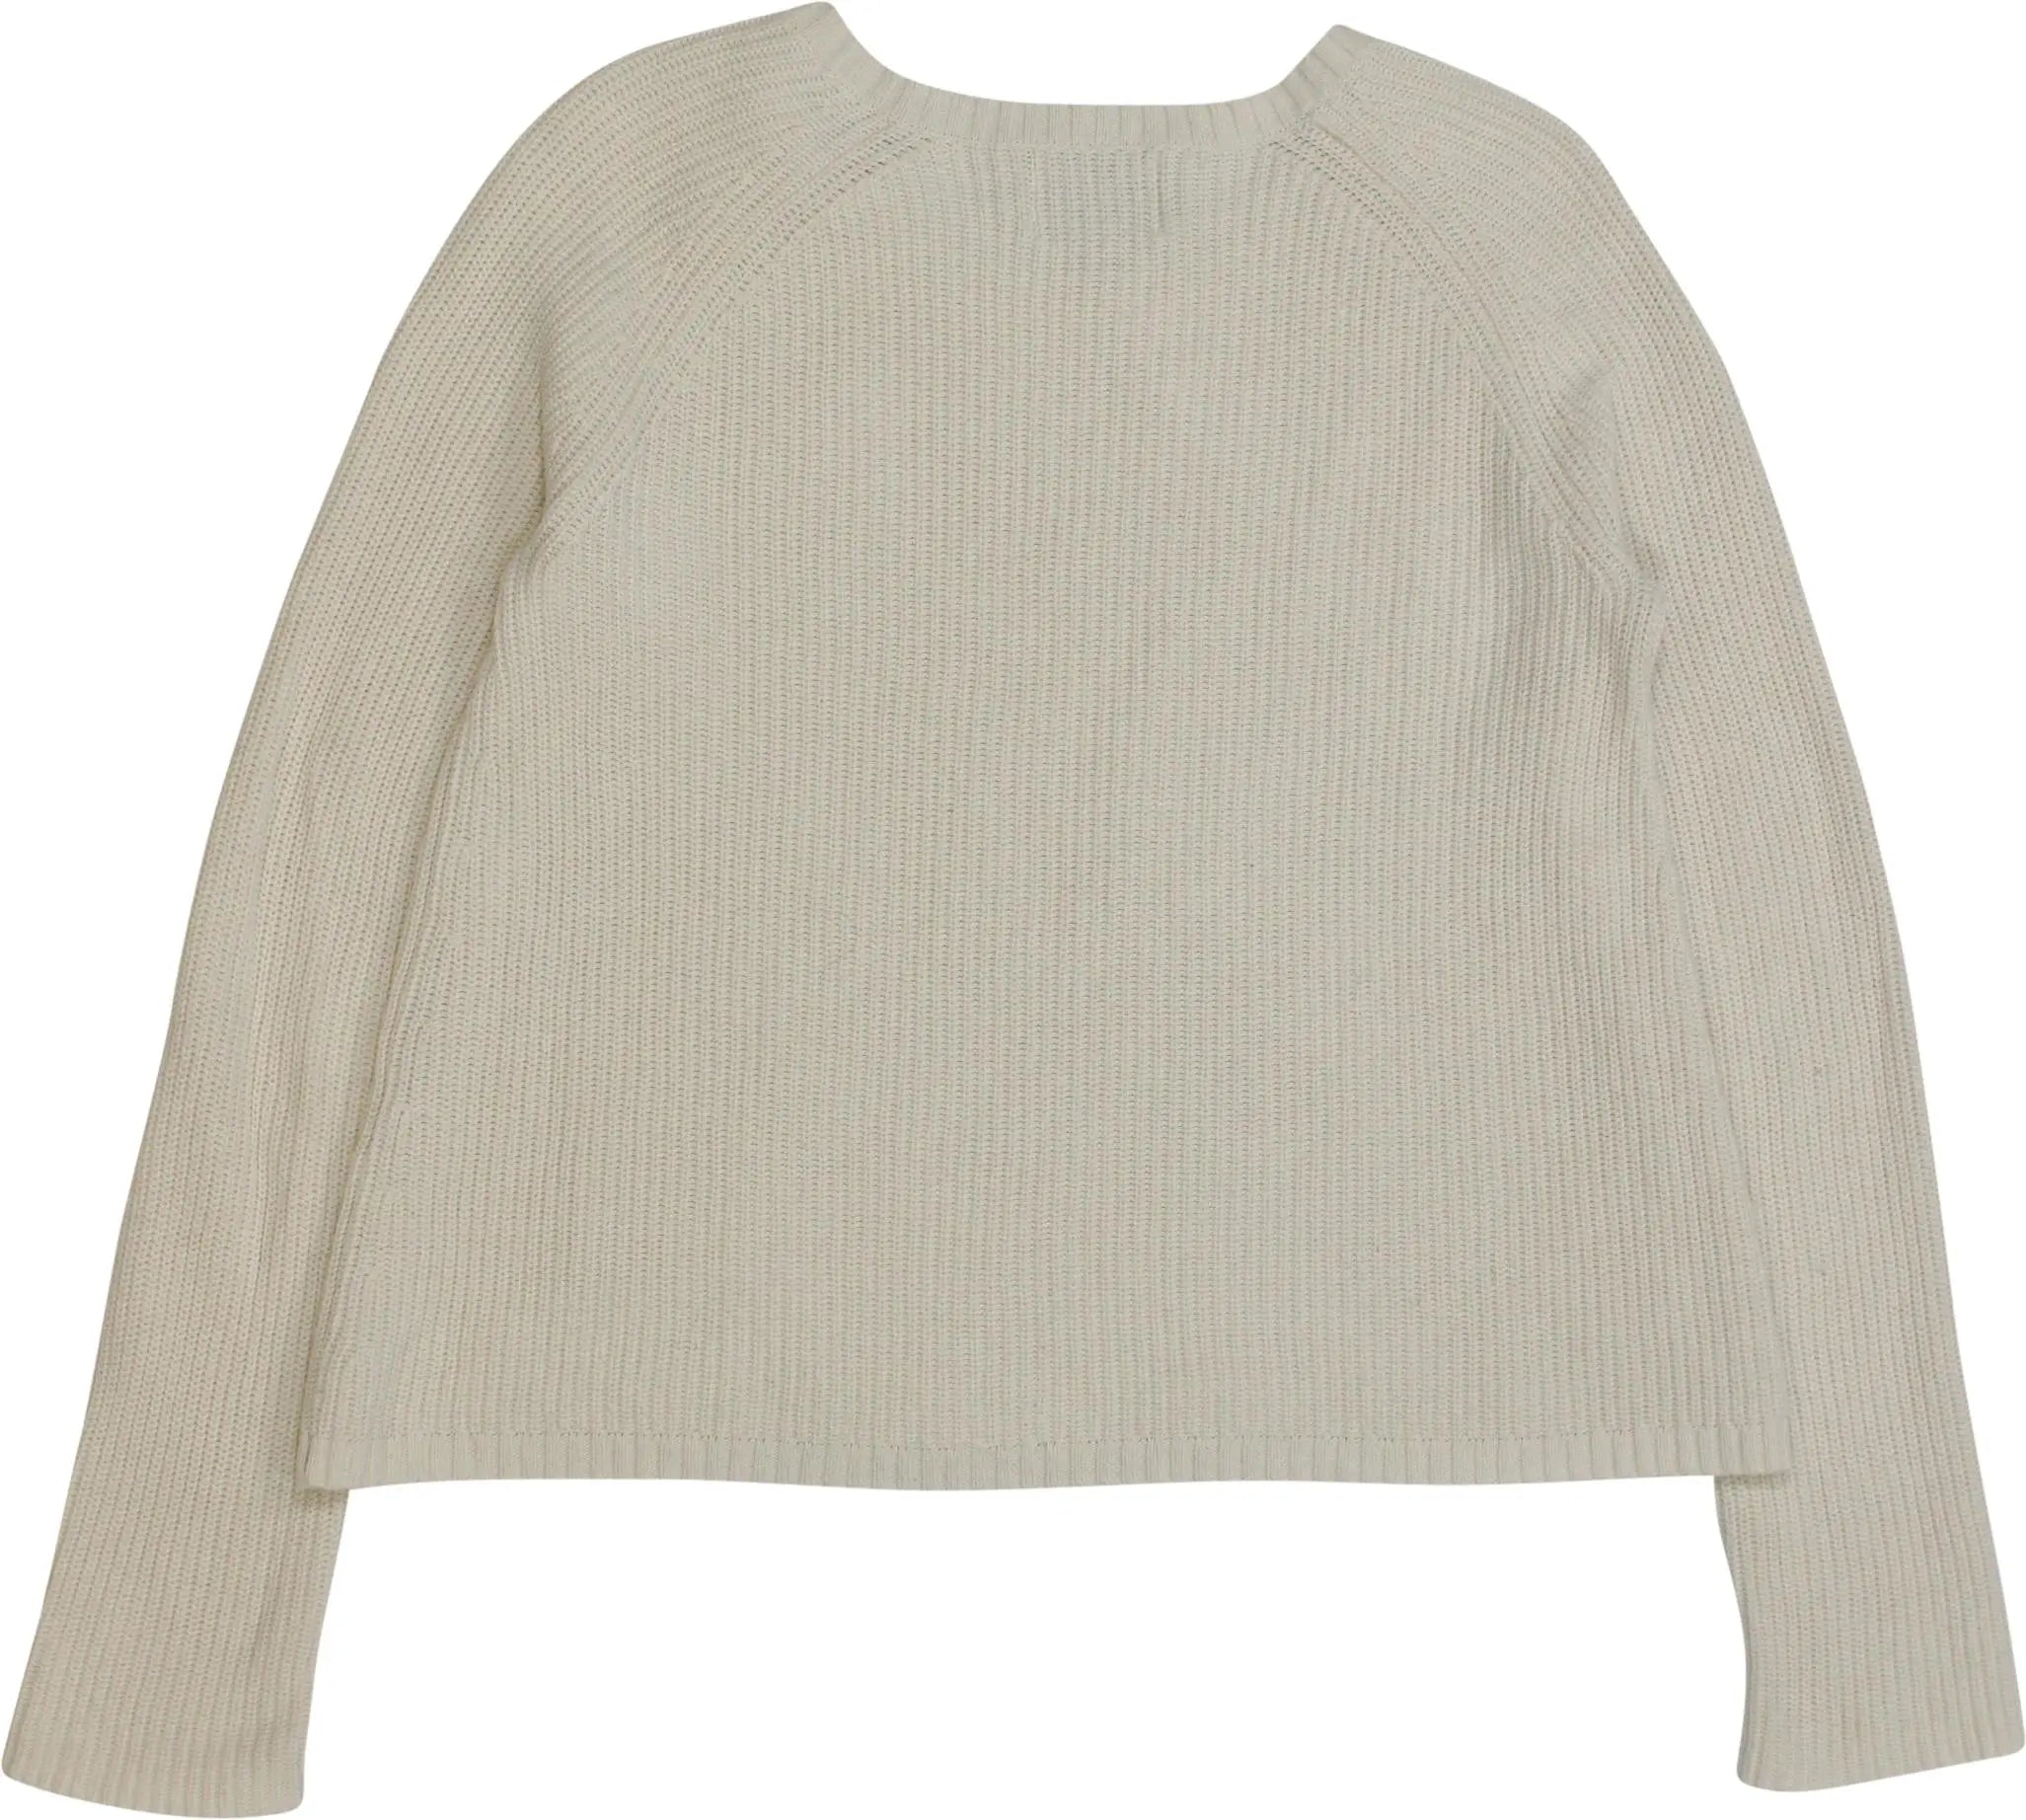 Woolrich - White knitted Jumper by Woolrich- ThriftTale.com - Vintage and second handclothing